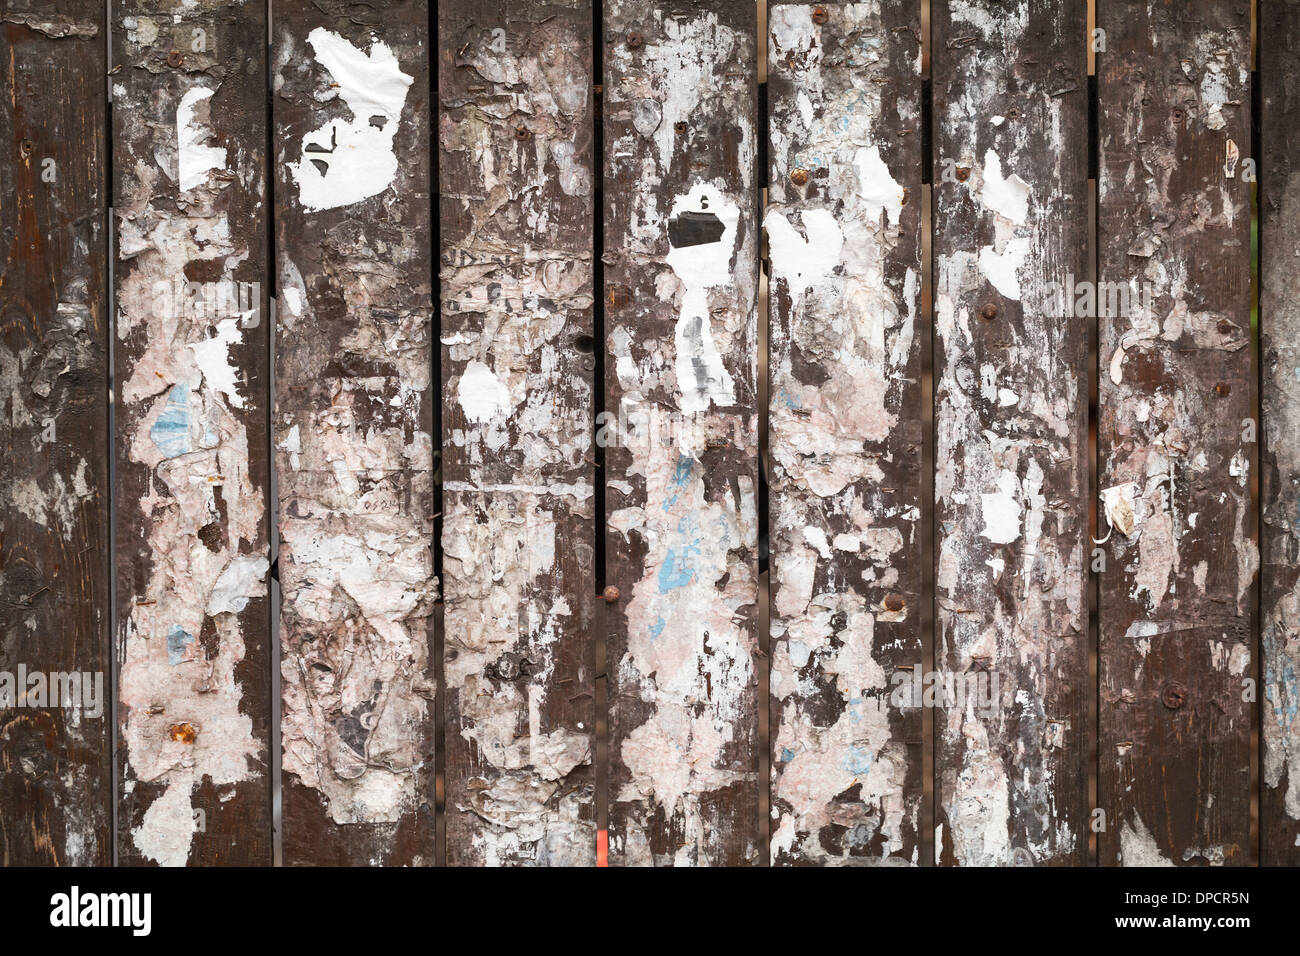 Old wooden fence background texture with scraps of paper ads Stock Photo